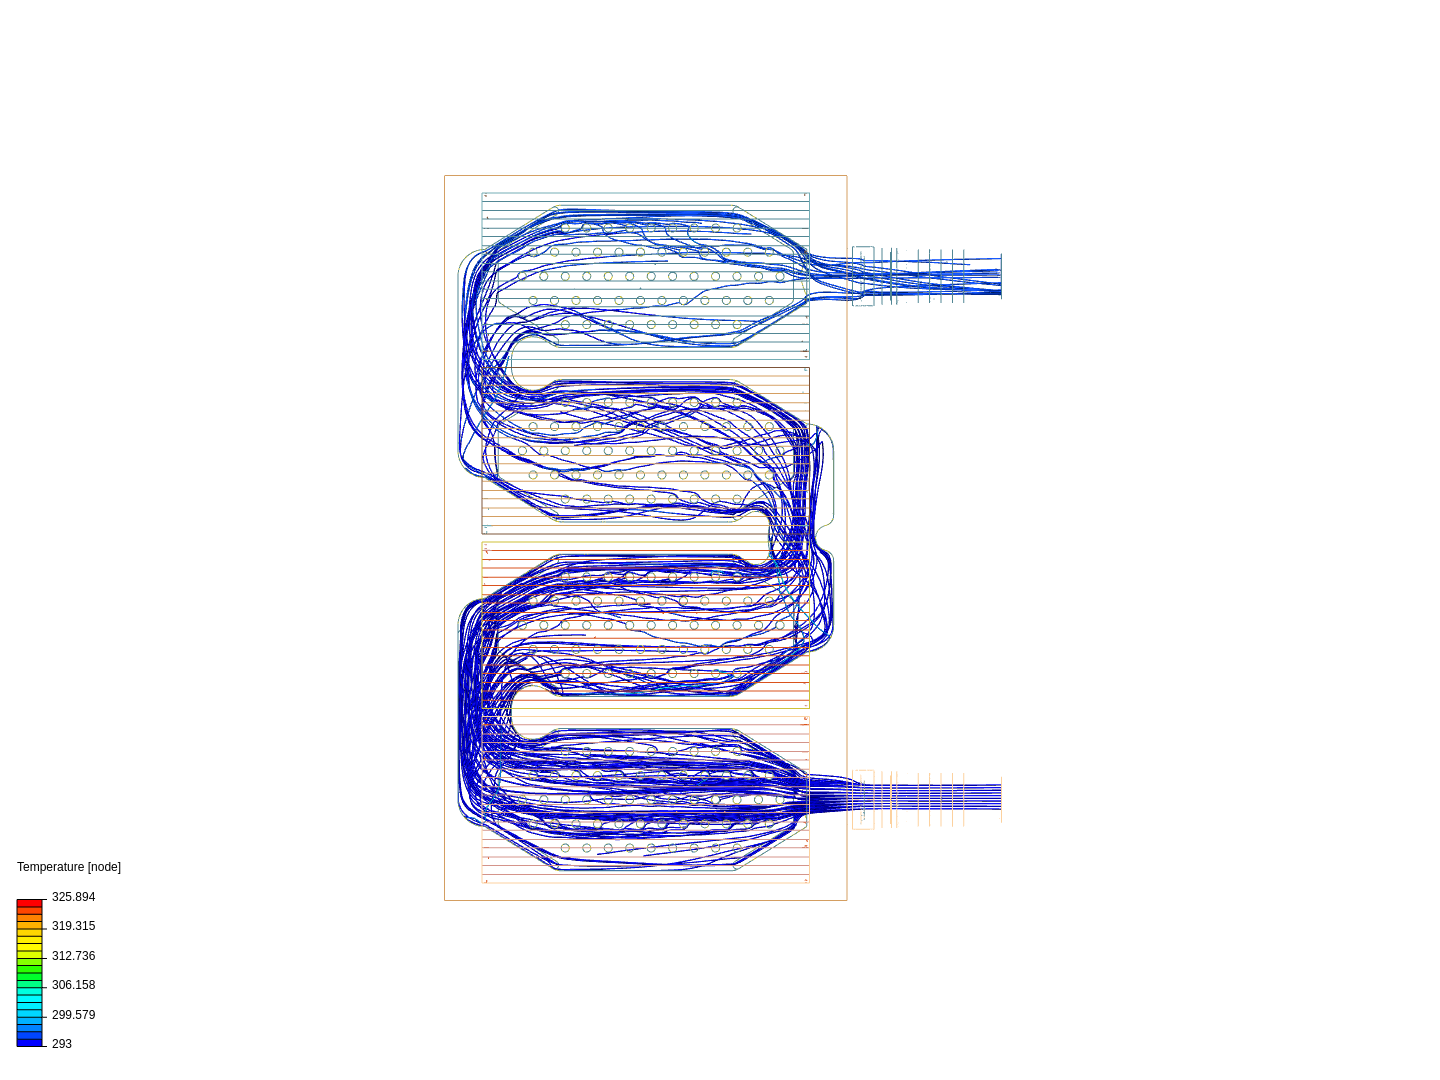 Cooling Tutorial image